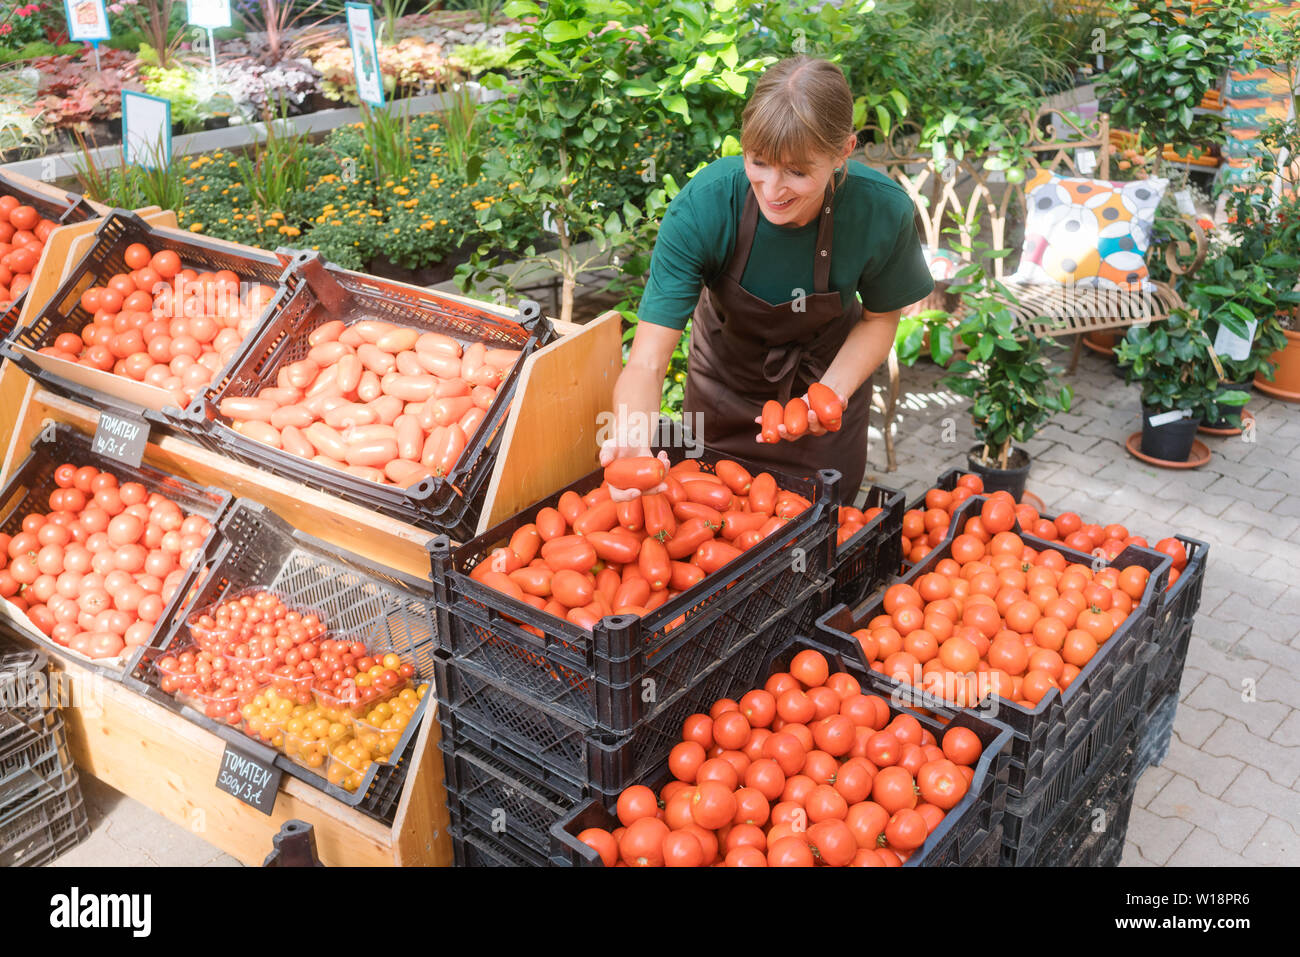 Gardener selling tomatoes and vegetables Stock Photo